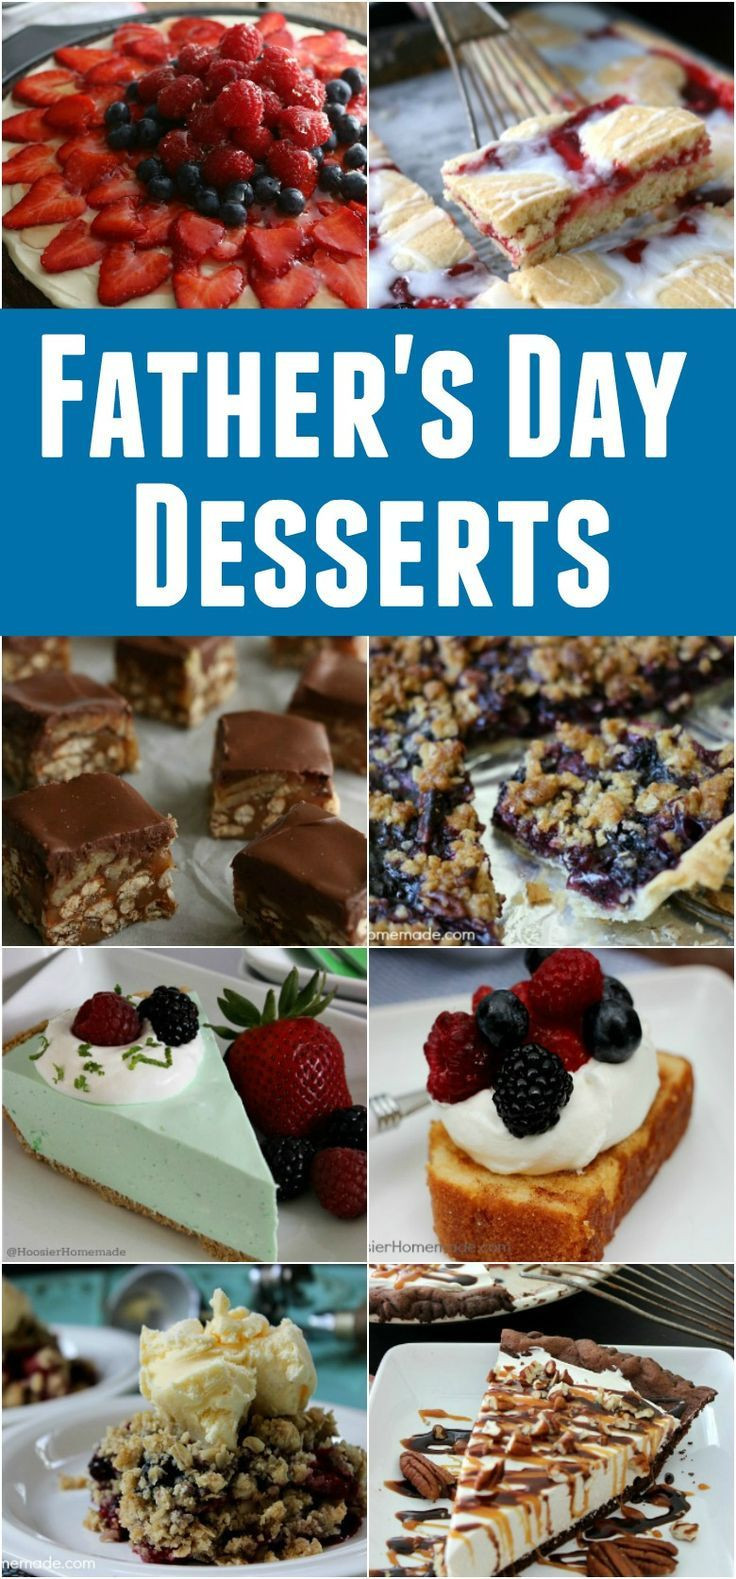 Mother'S Day Desserts
 The 20 Best Ideas for Desserts for Mother s Day Best